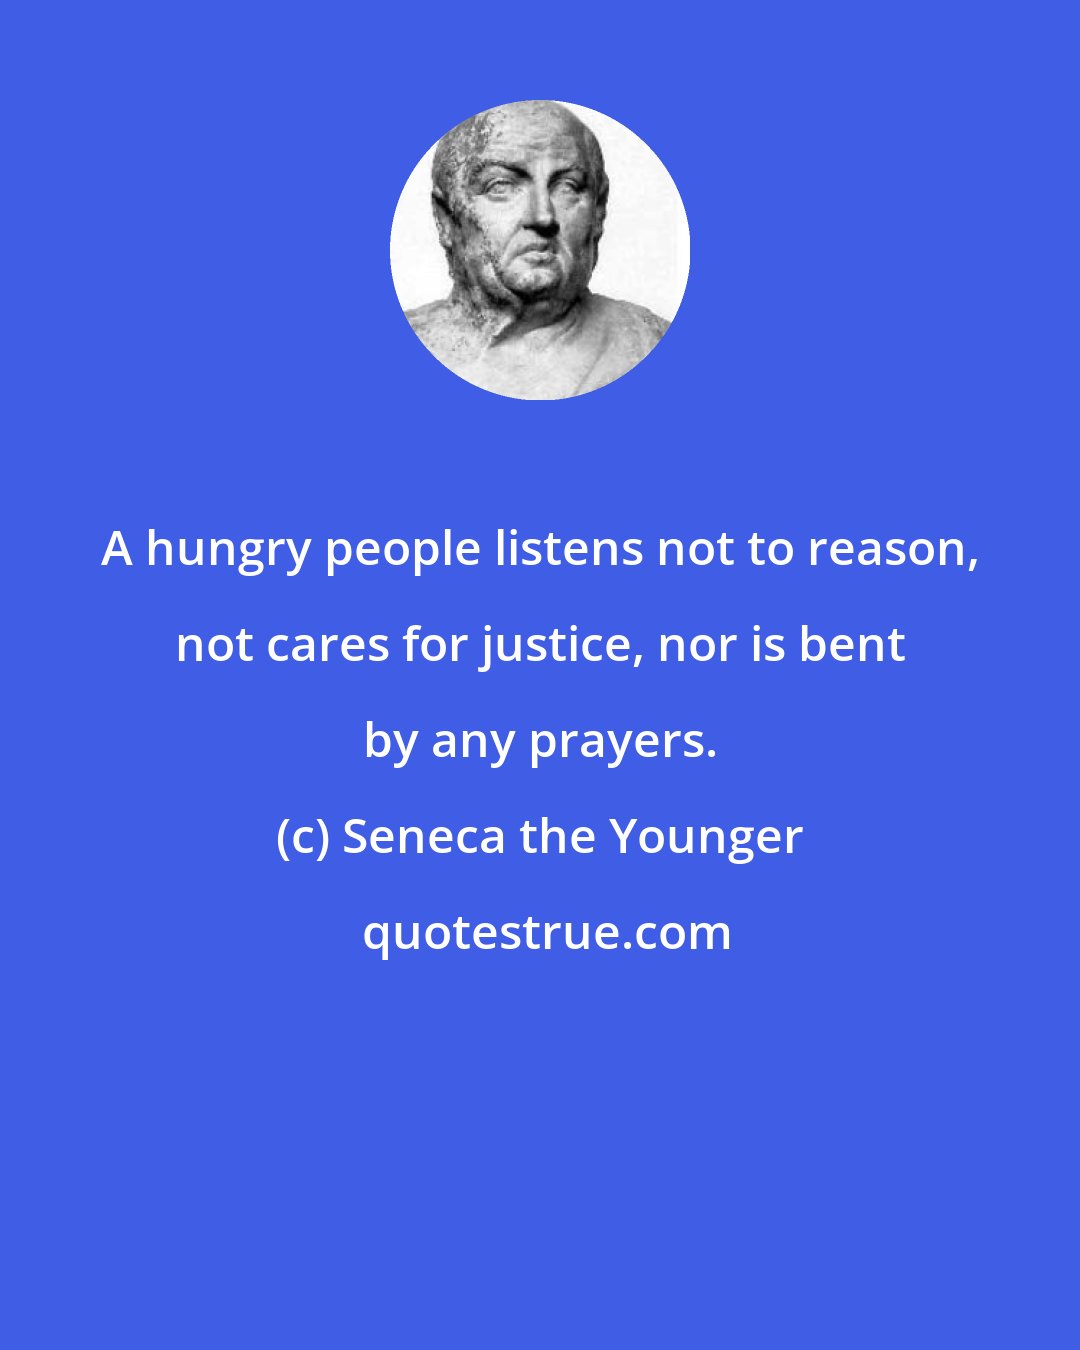 Seneca the Younger: A hungry people listens not to reason, not cares for justice, nor is bent by any prayers.